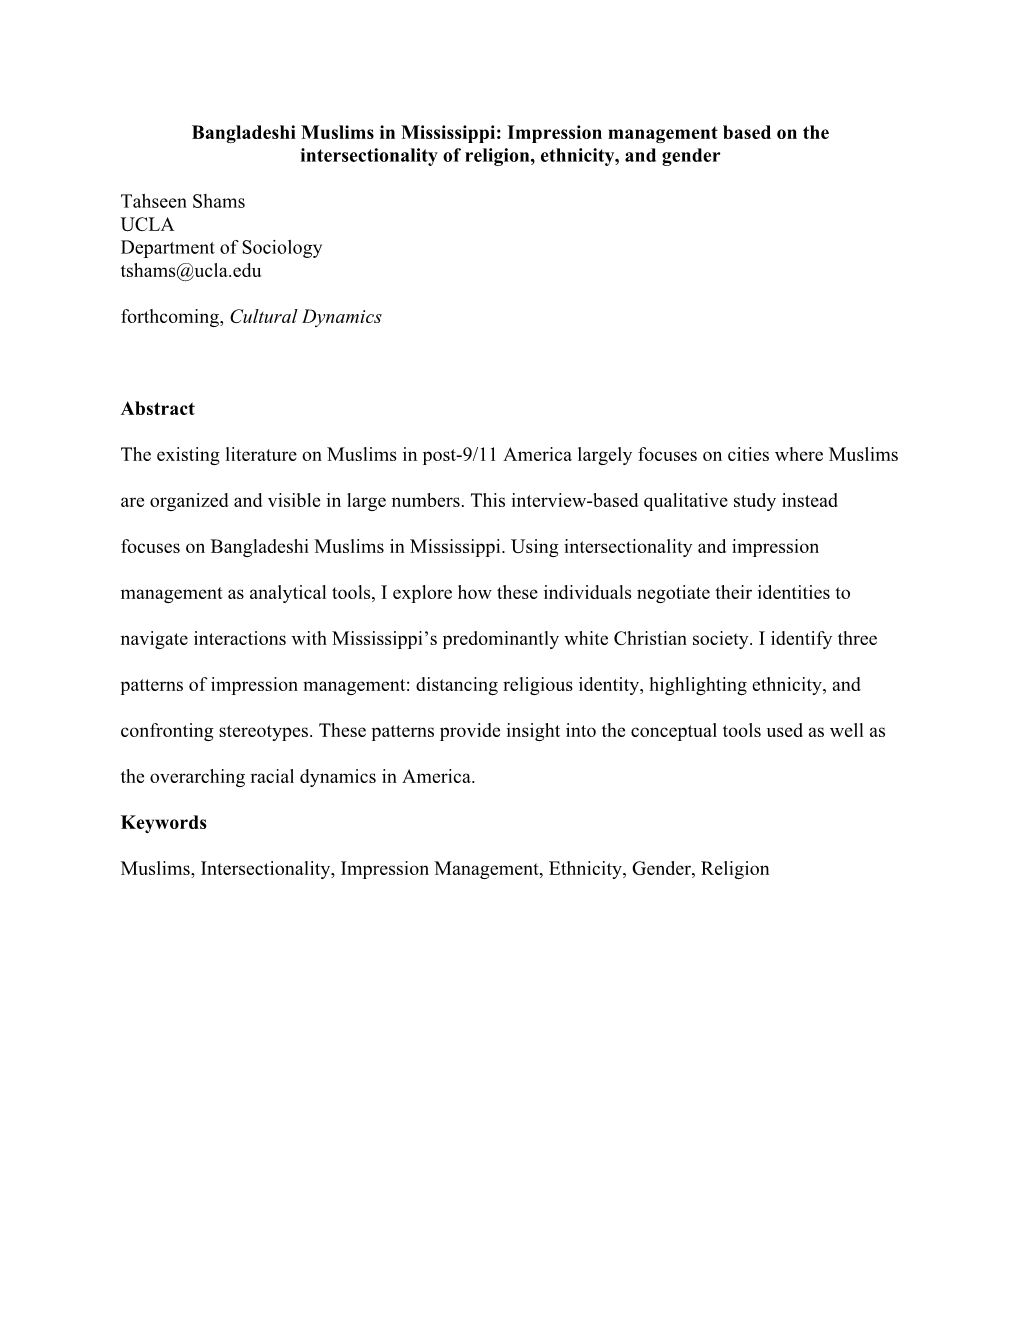 Bangladeshi Muslims in Mississippi: Impression Management Based on the Intersectionality of Religion, Ethnicity, and Gender